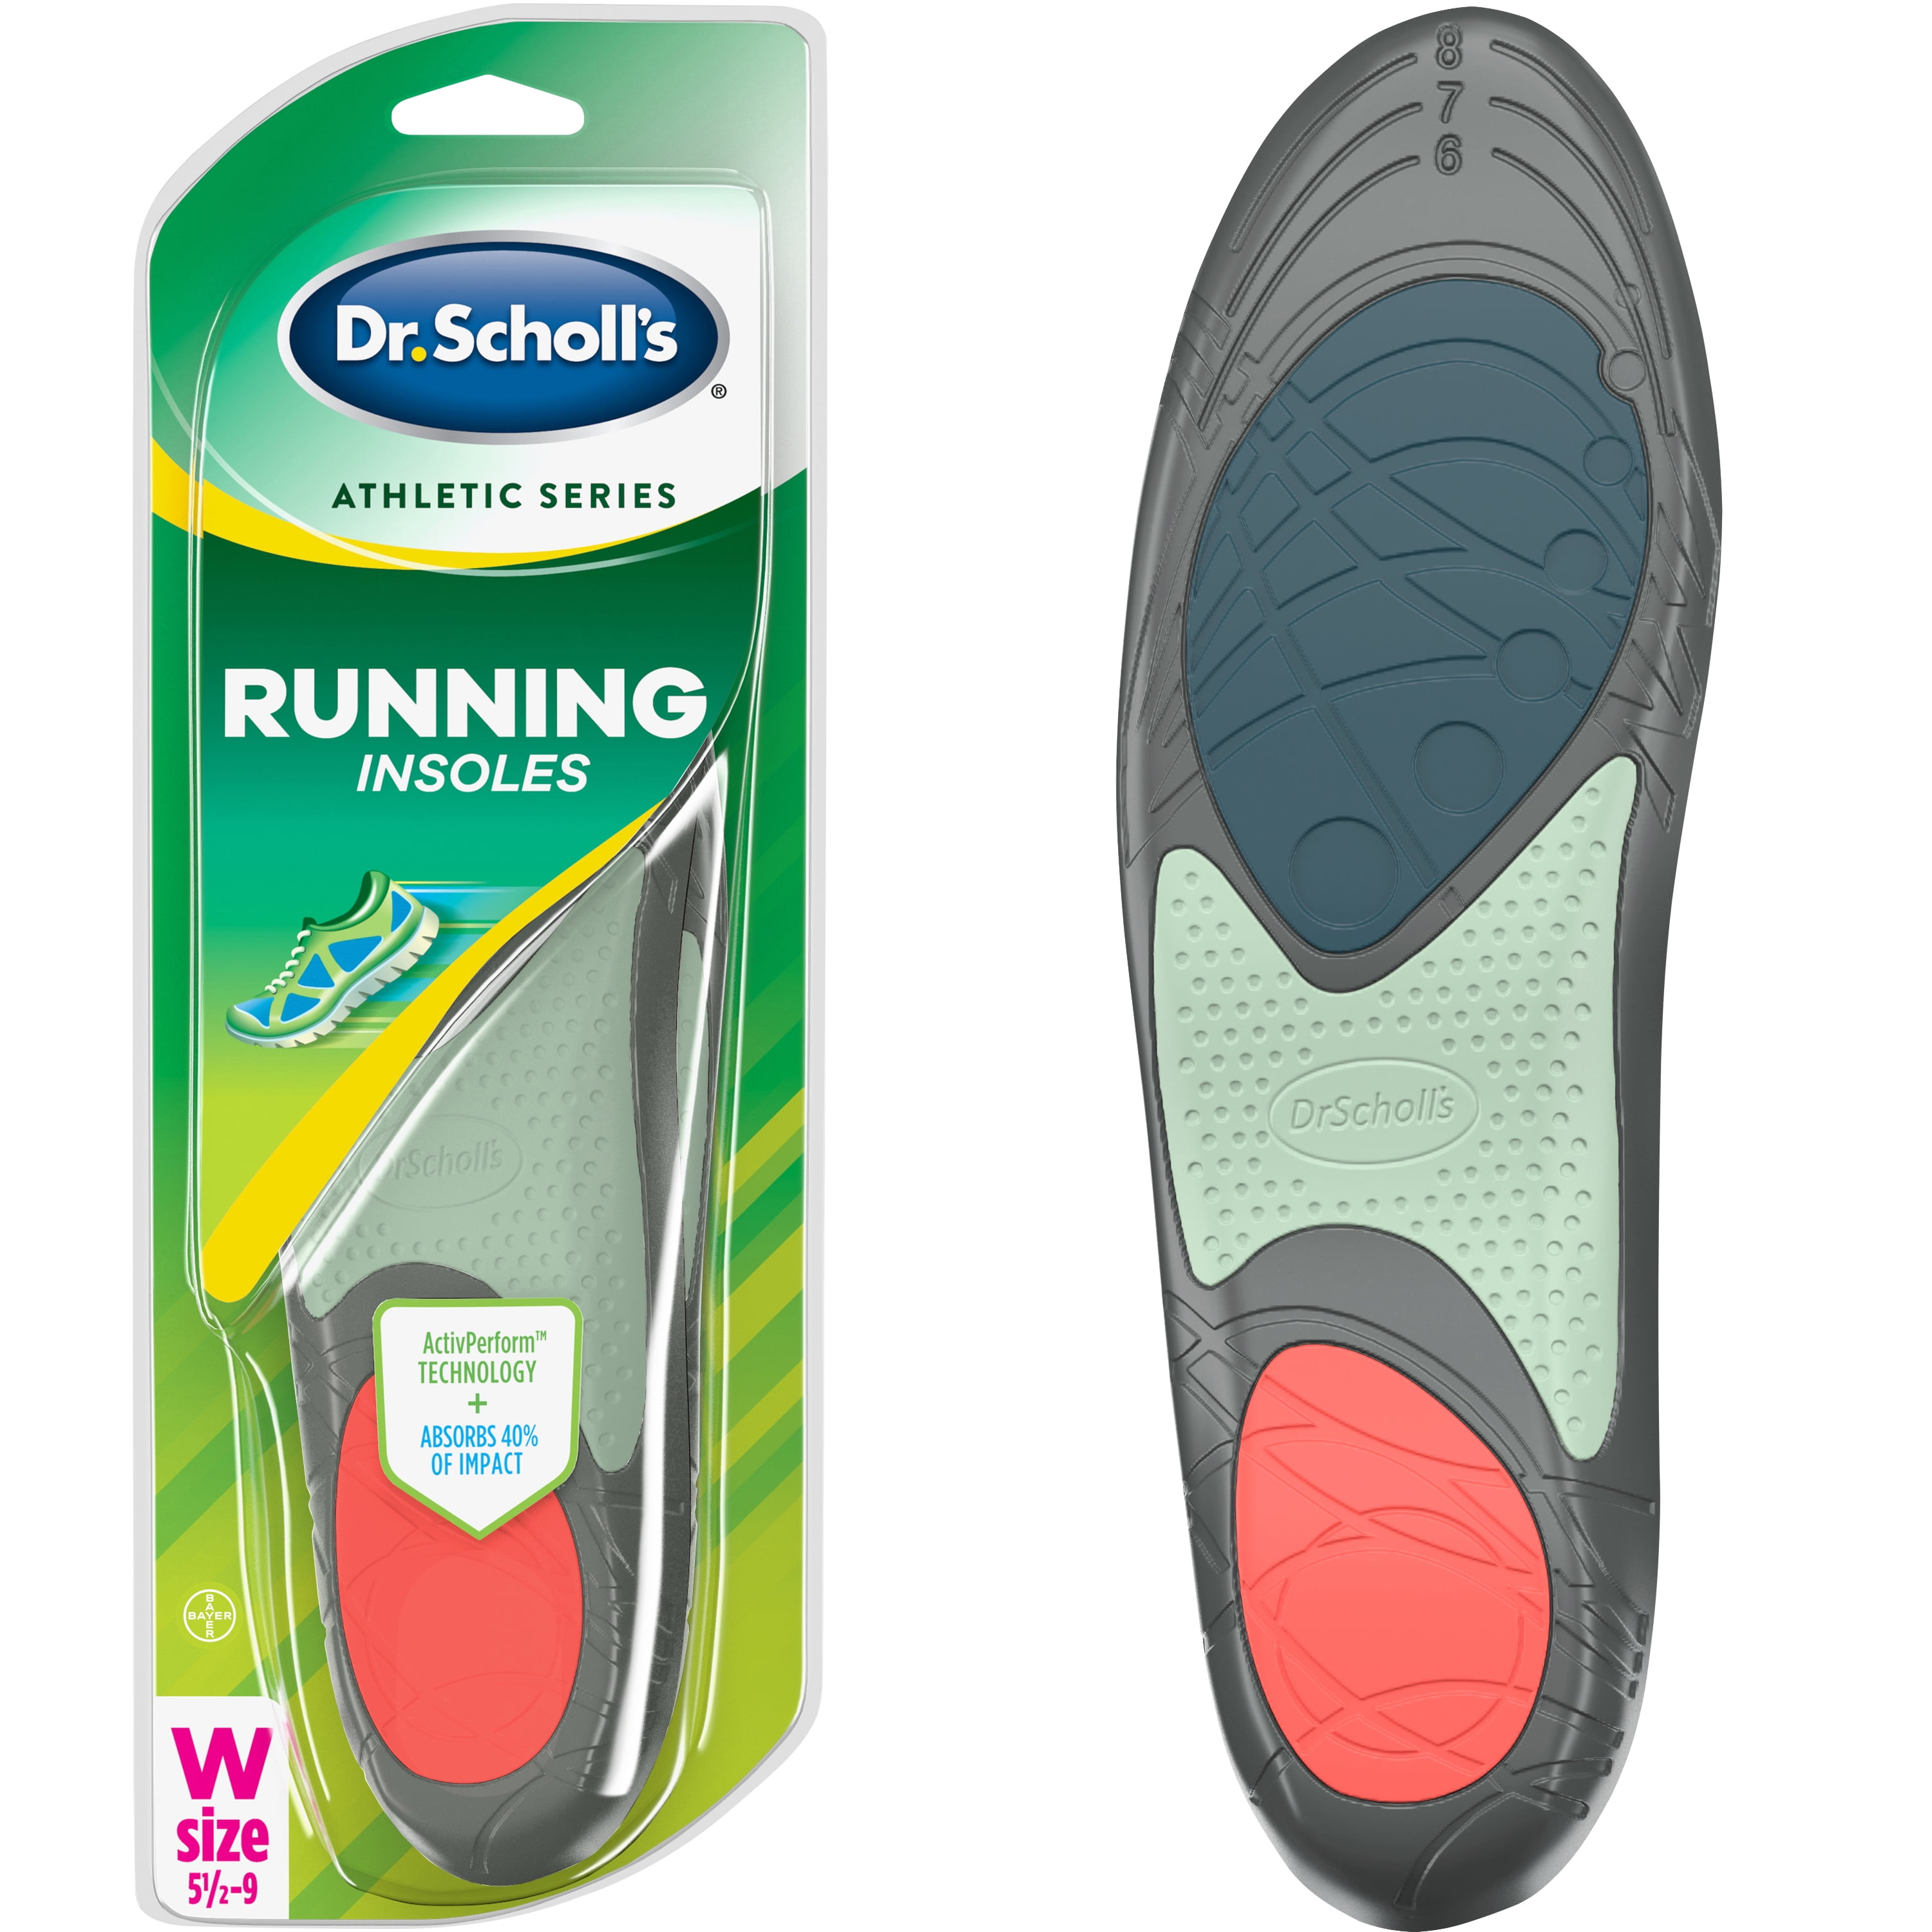 Athletic Series Running Insoles for 